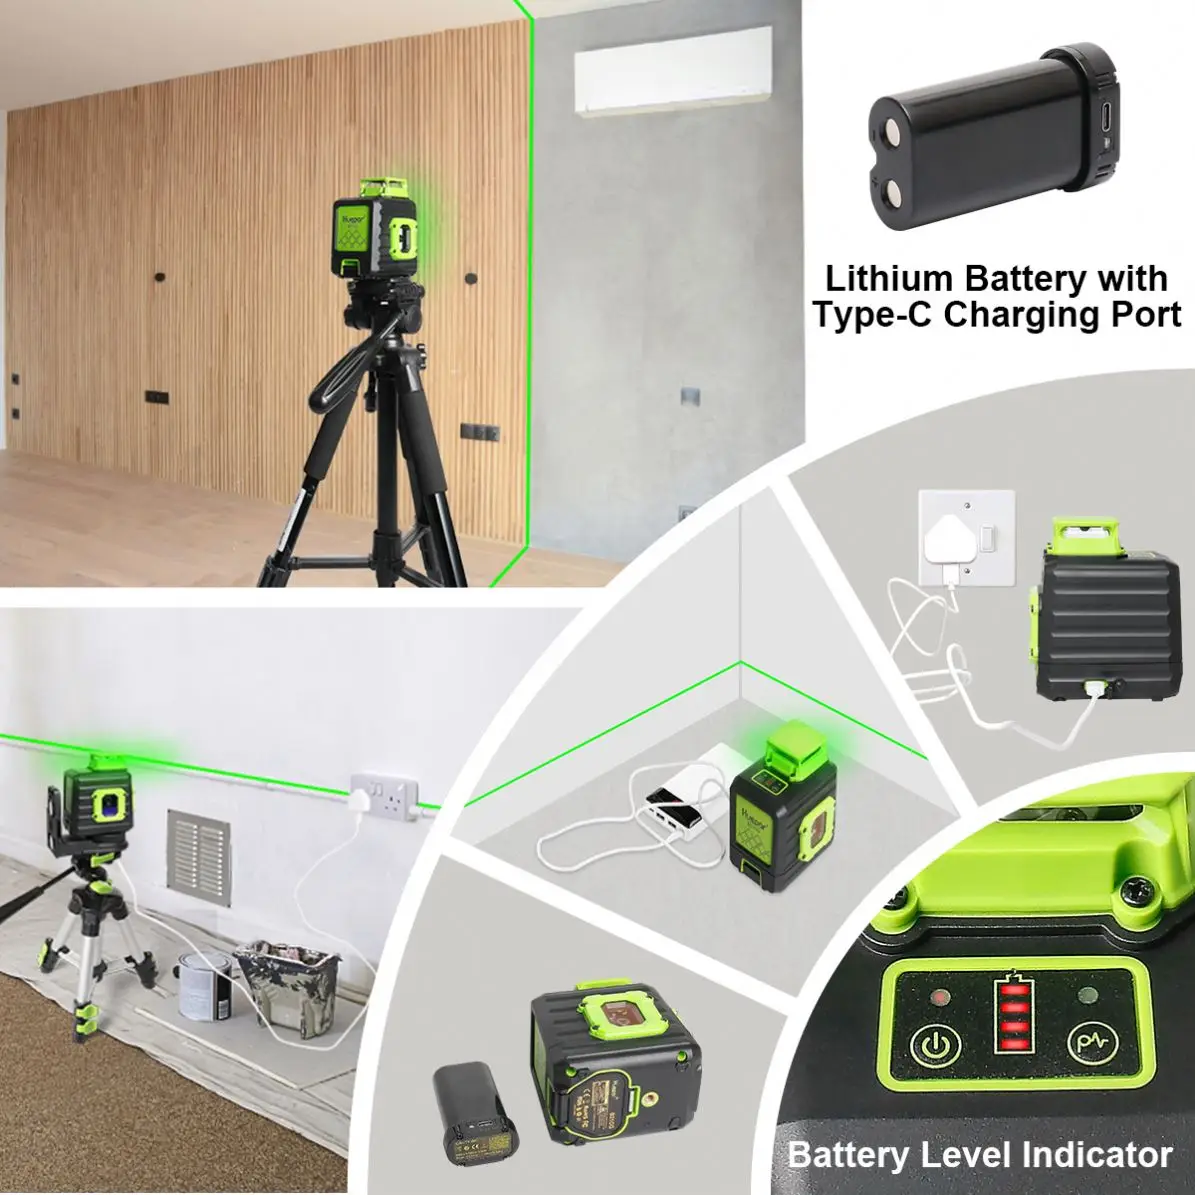 Huepar B21CG - Green 360° Horizontal and Two Vertical Lines Cross Line  Laser Level with Hard Carry Case